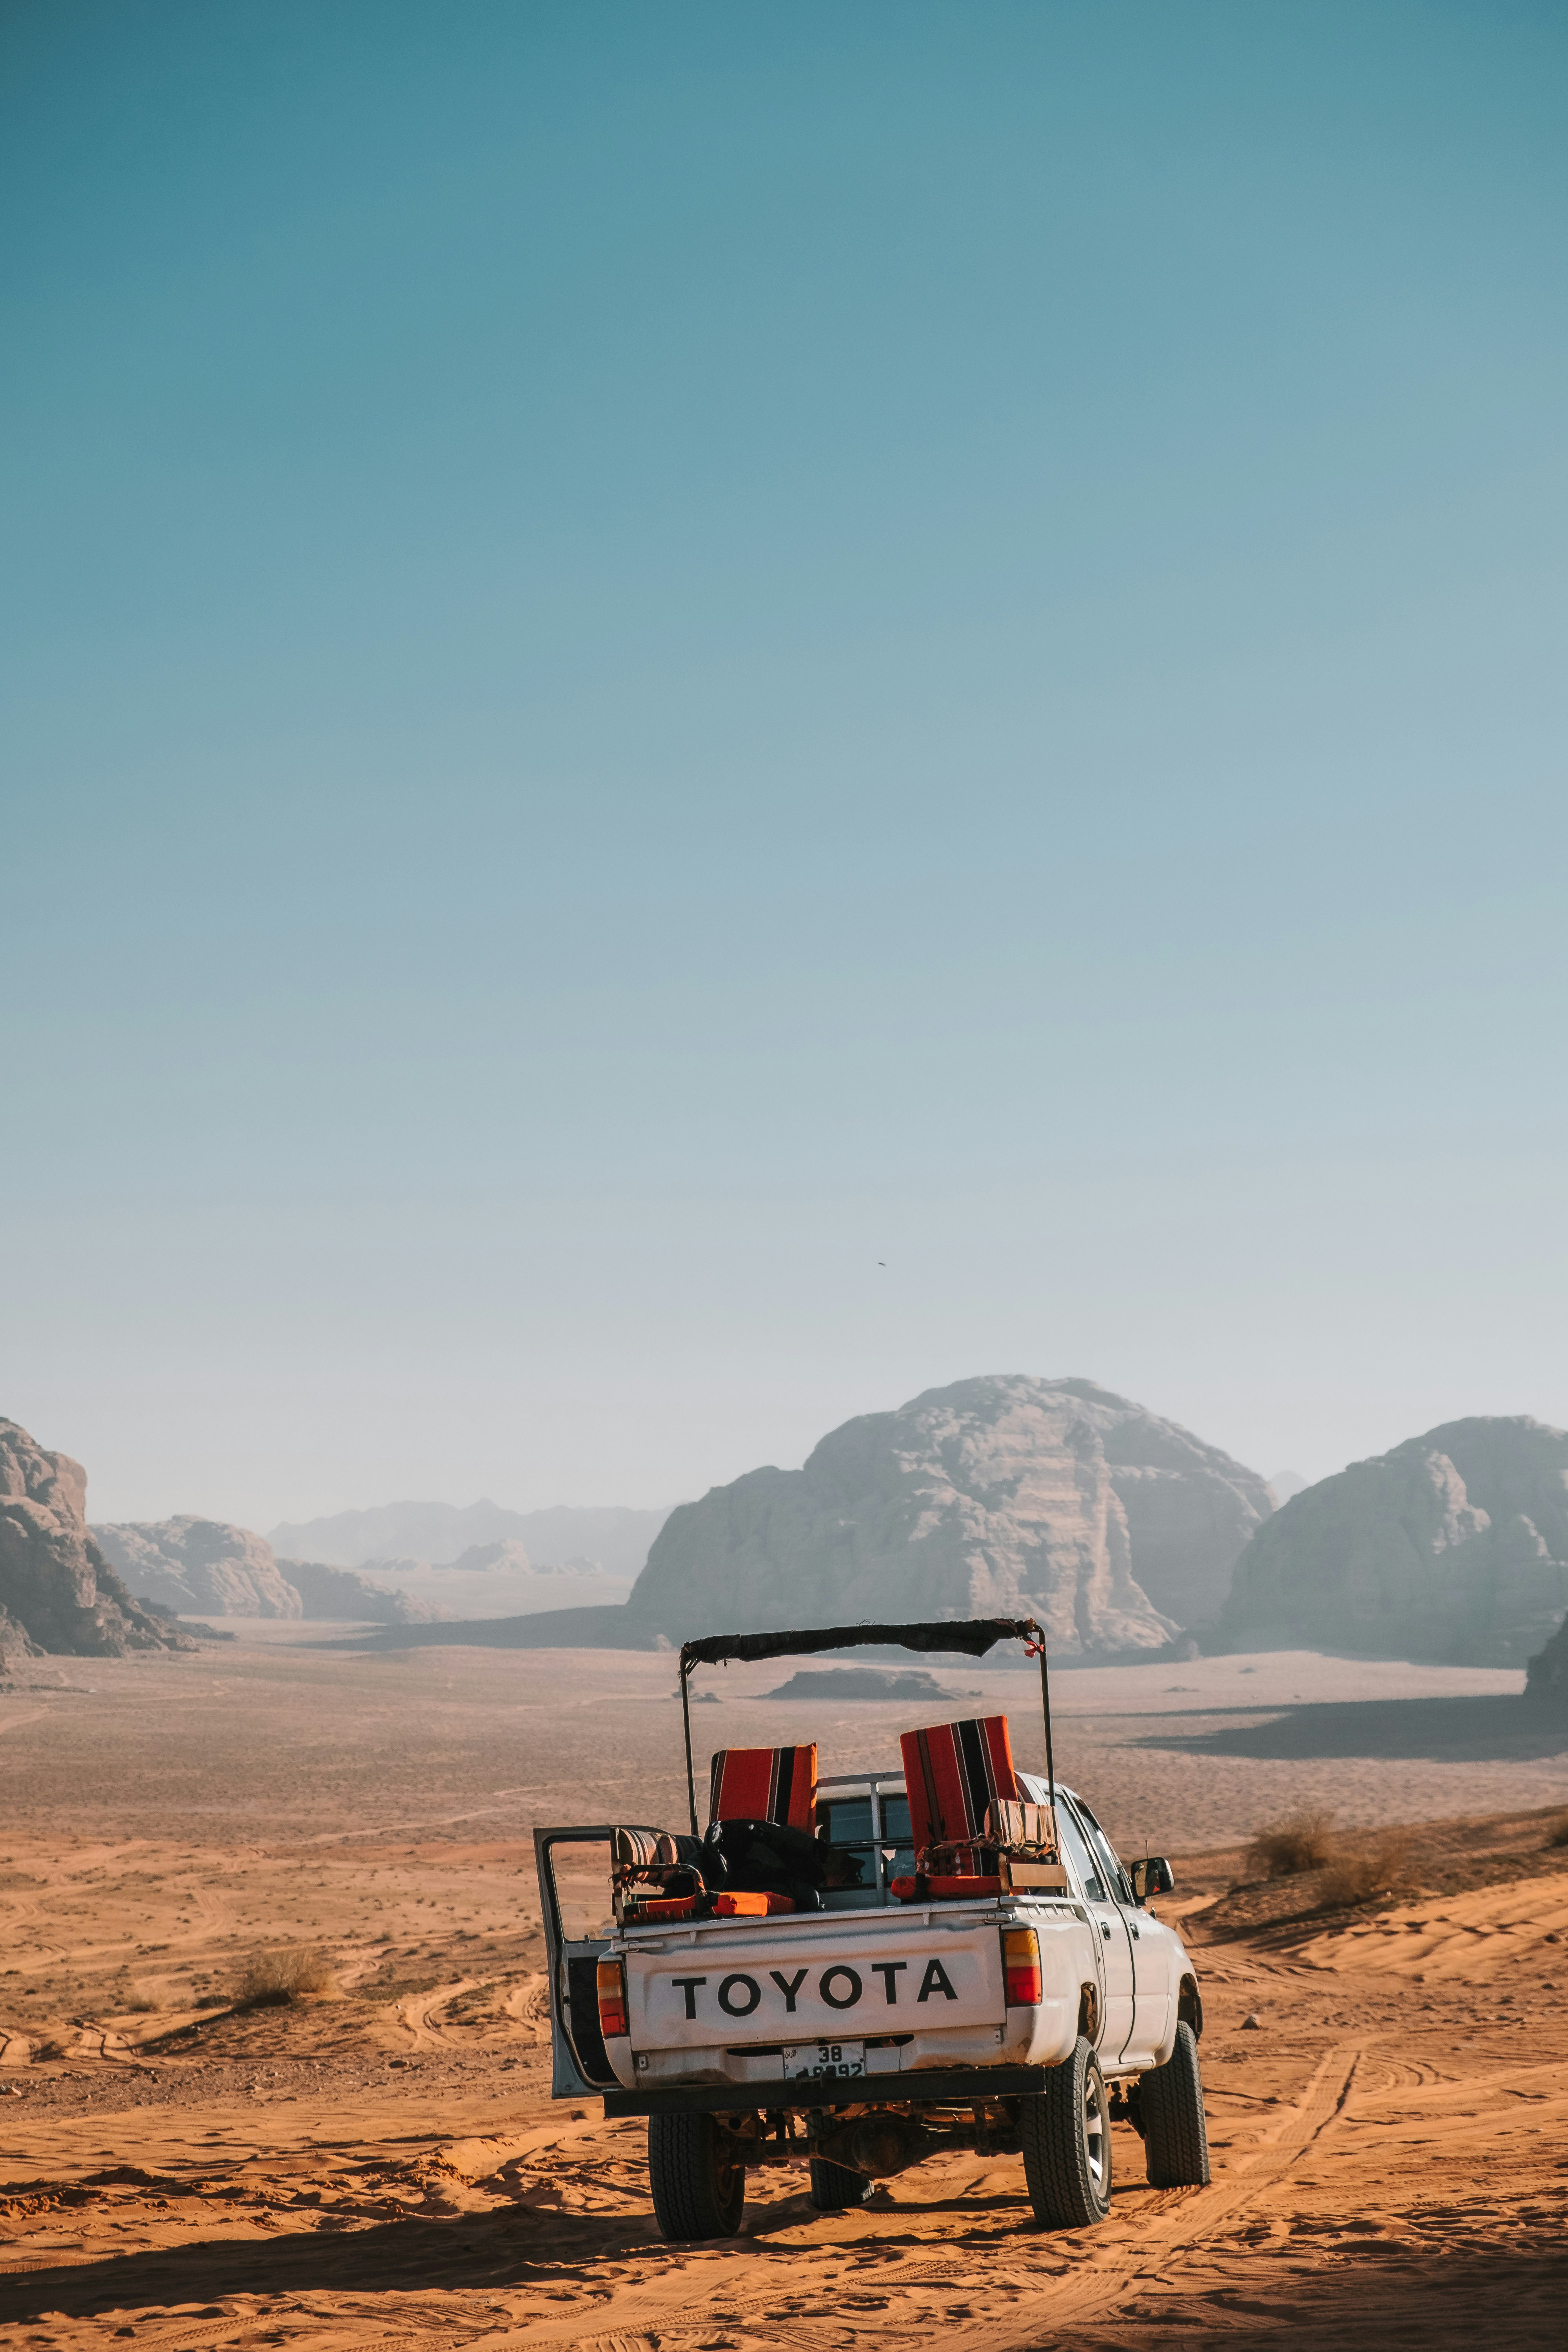 You see these kinds of pickups all around in the Wadi Rum desert. They complement the landscape so well.